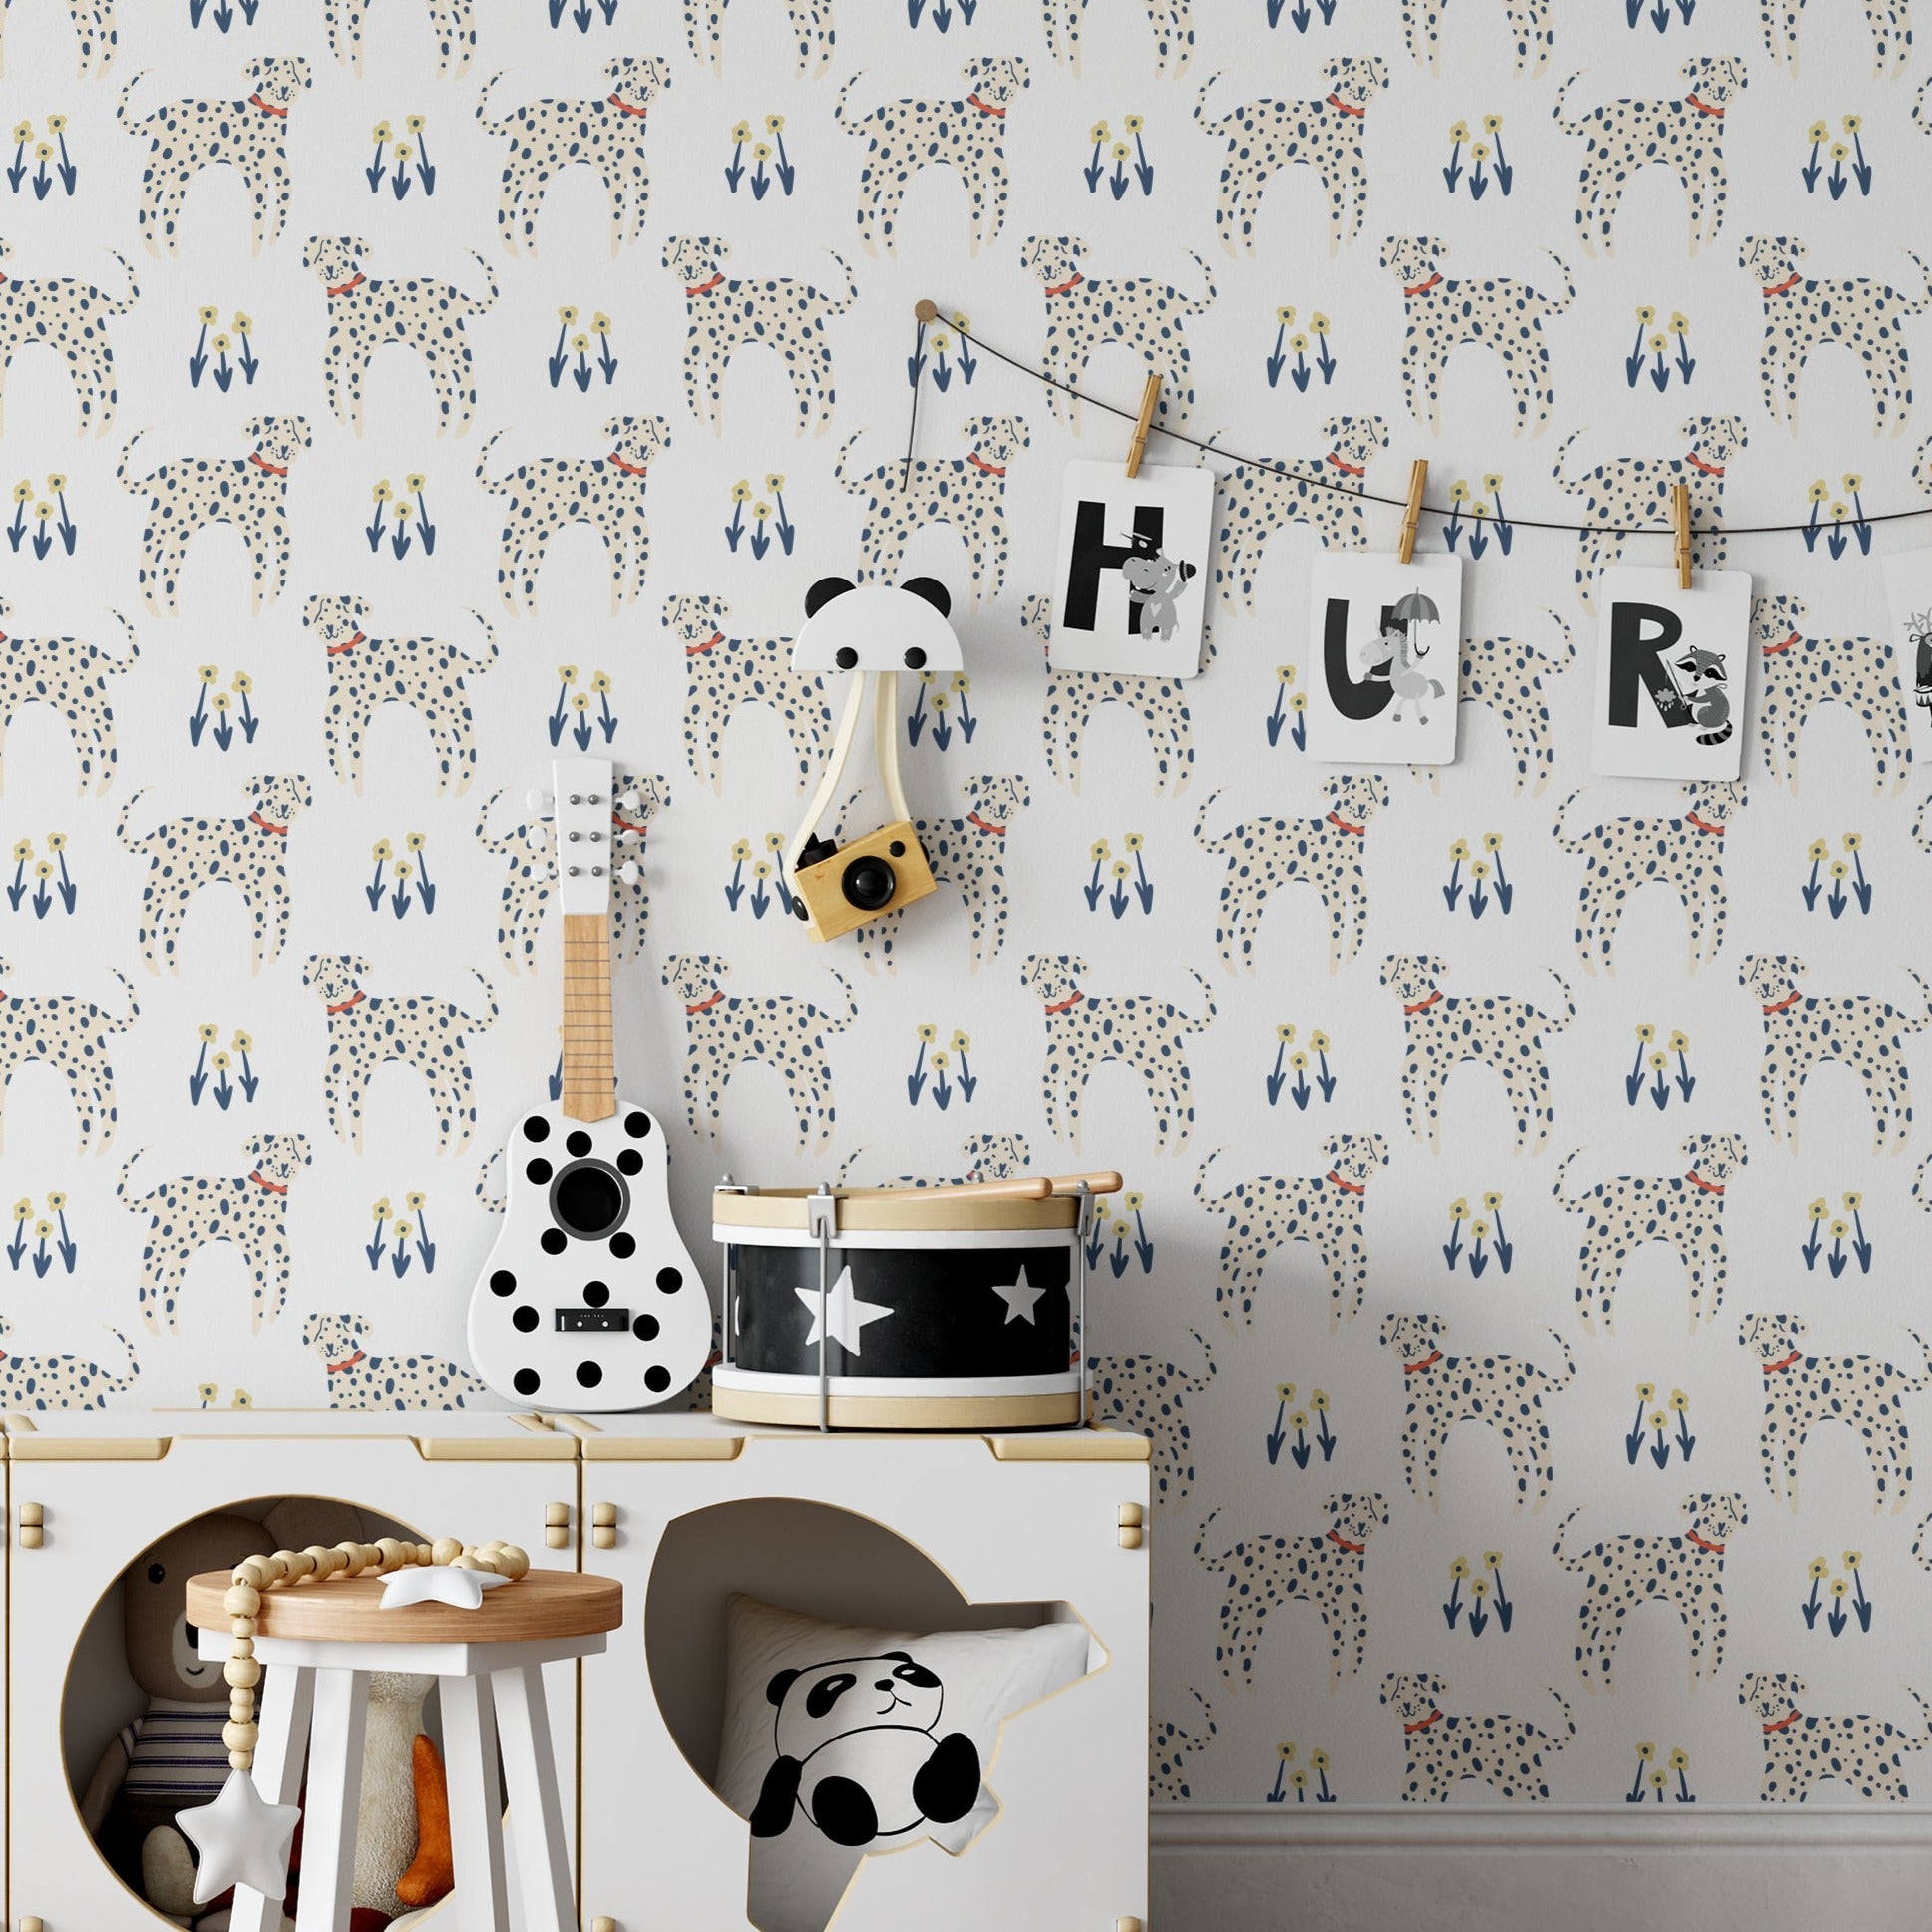 A child's nursery room adorned with 'Dog Wallpaper 33,' which displays playful Dalmatians and vibrant flowers in blue and yellow on a white background, creating a cheerful and inviting space